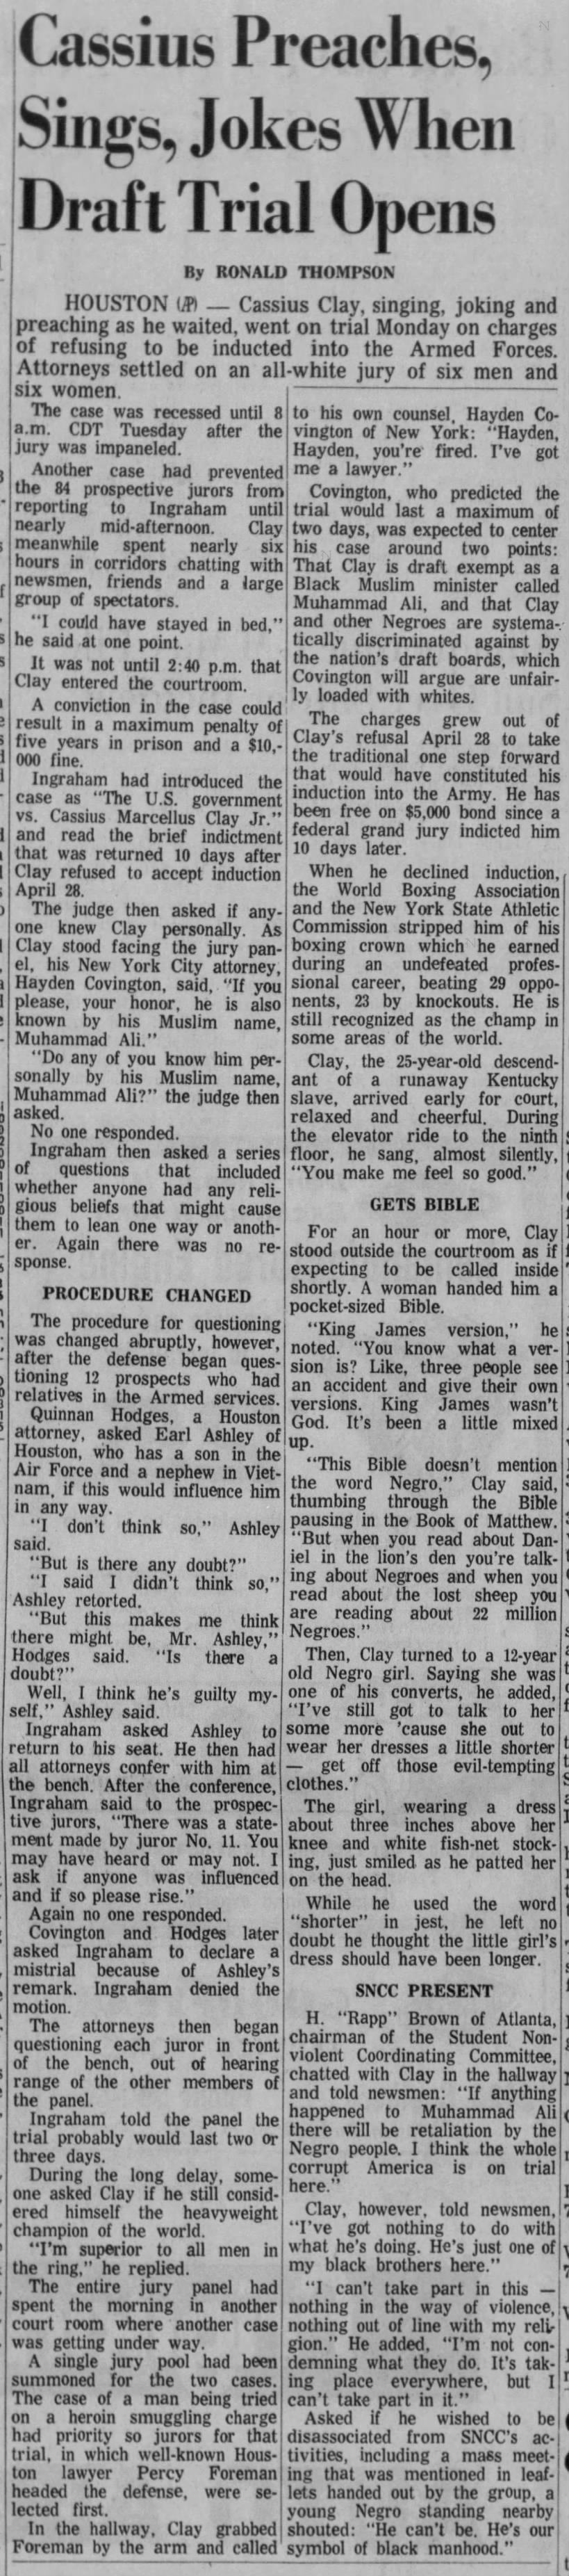 Newspaper report on the beginning of Muhammad Ali's trial for refusing to be inducted into military